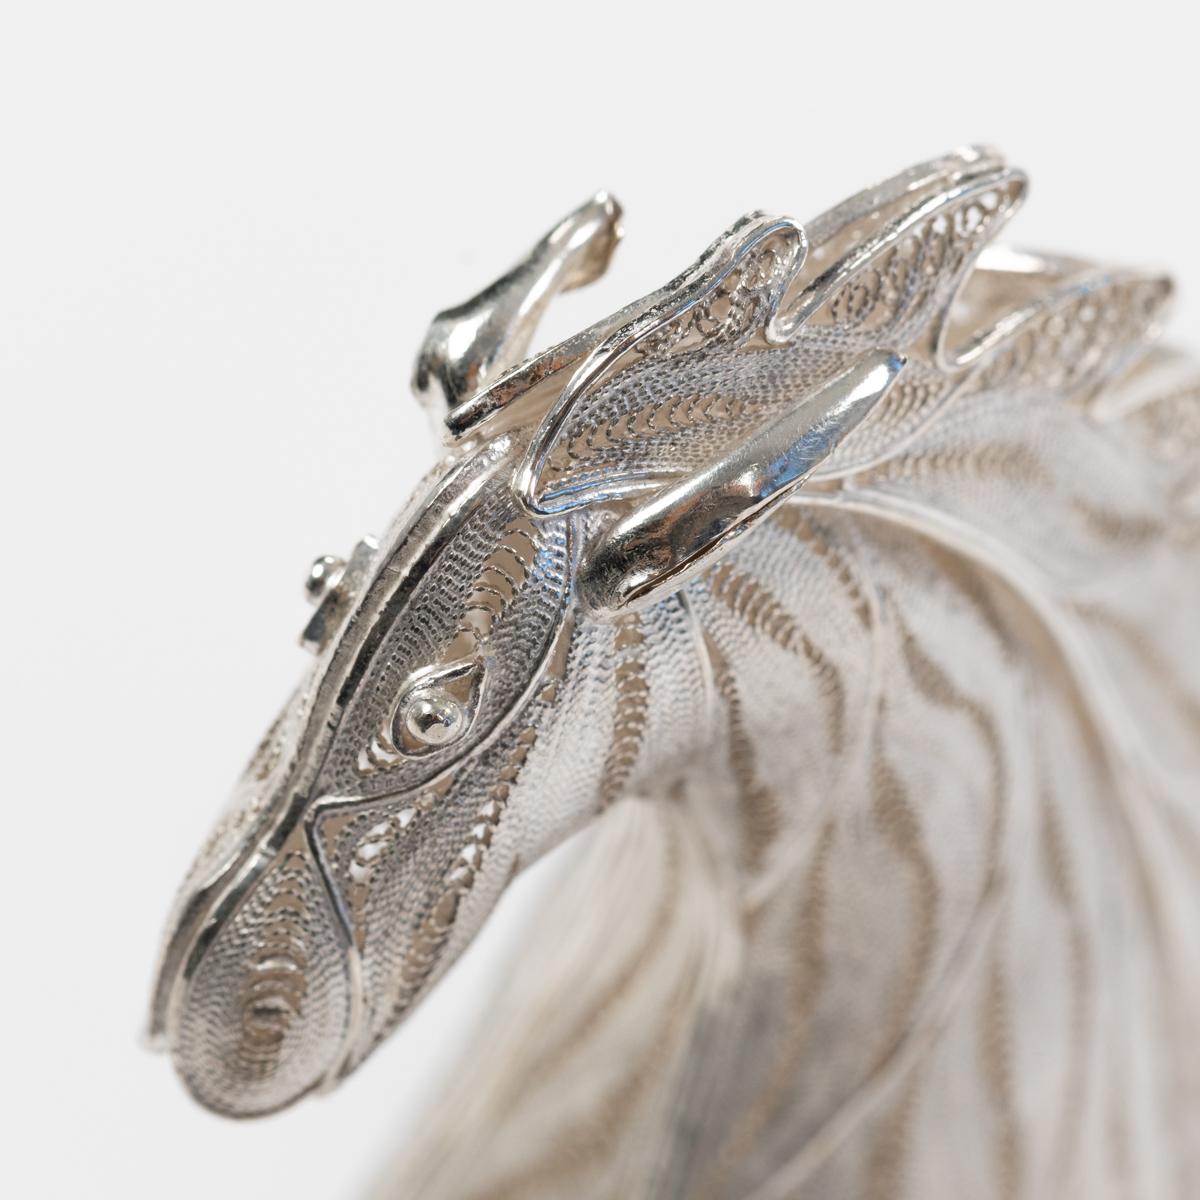 Jumping Horse Sculpture 925 Silver Handcrafted Filigree Technique Germany 2005 For Sale 6